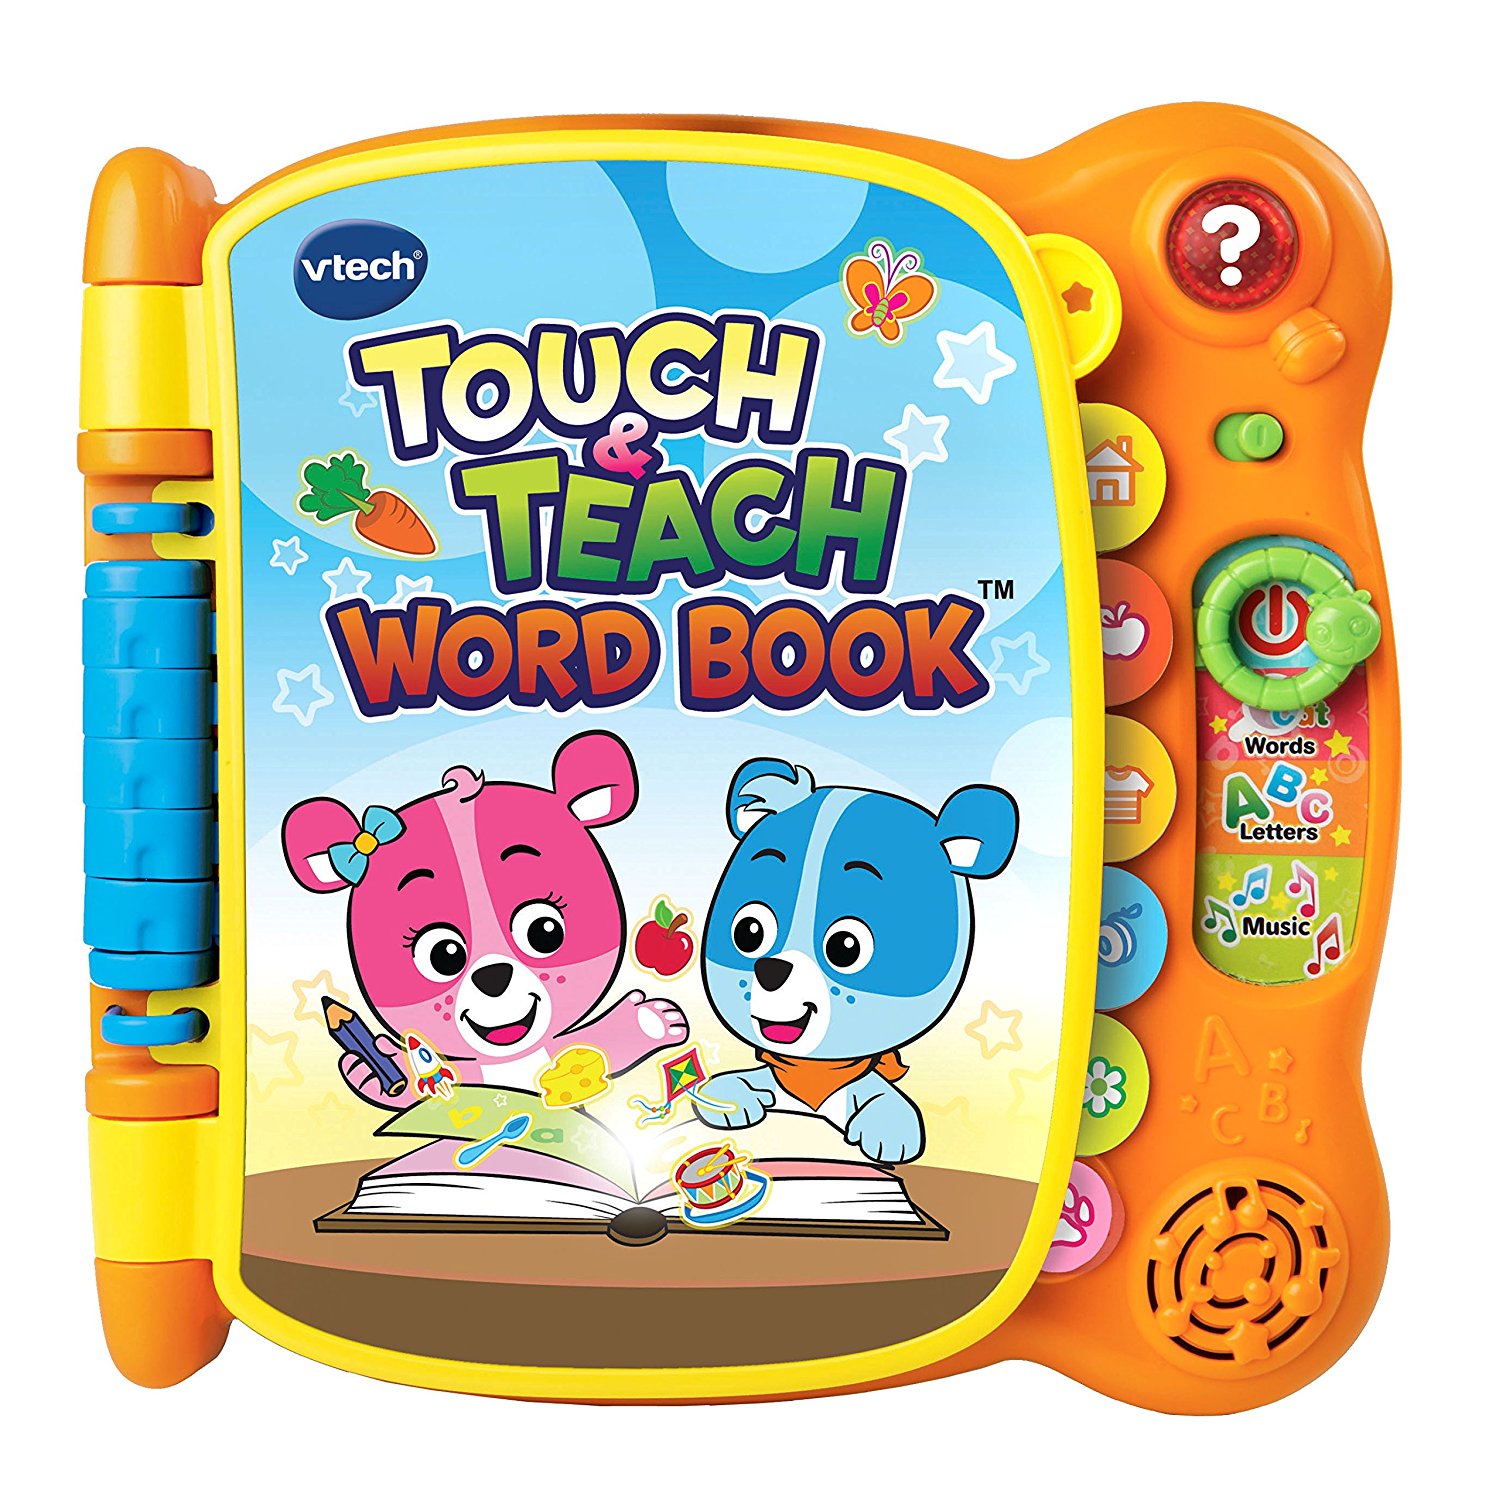 great educational toys for 5 year olds